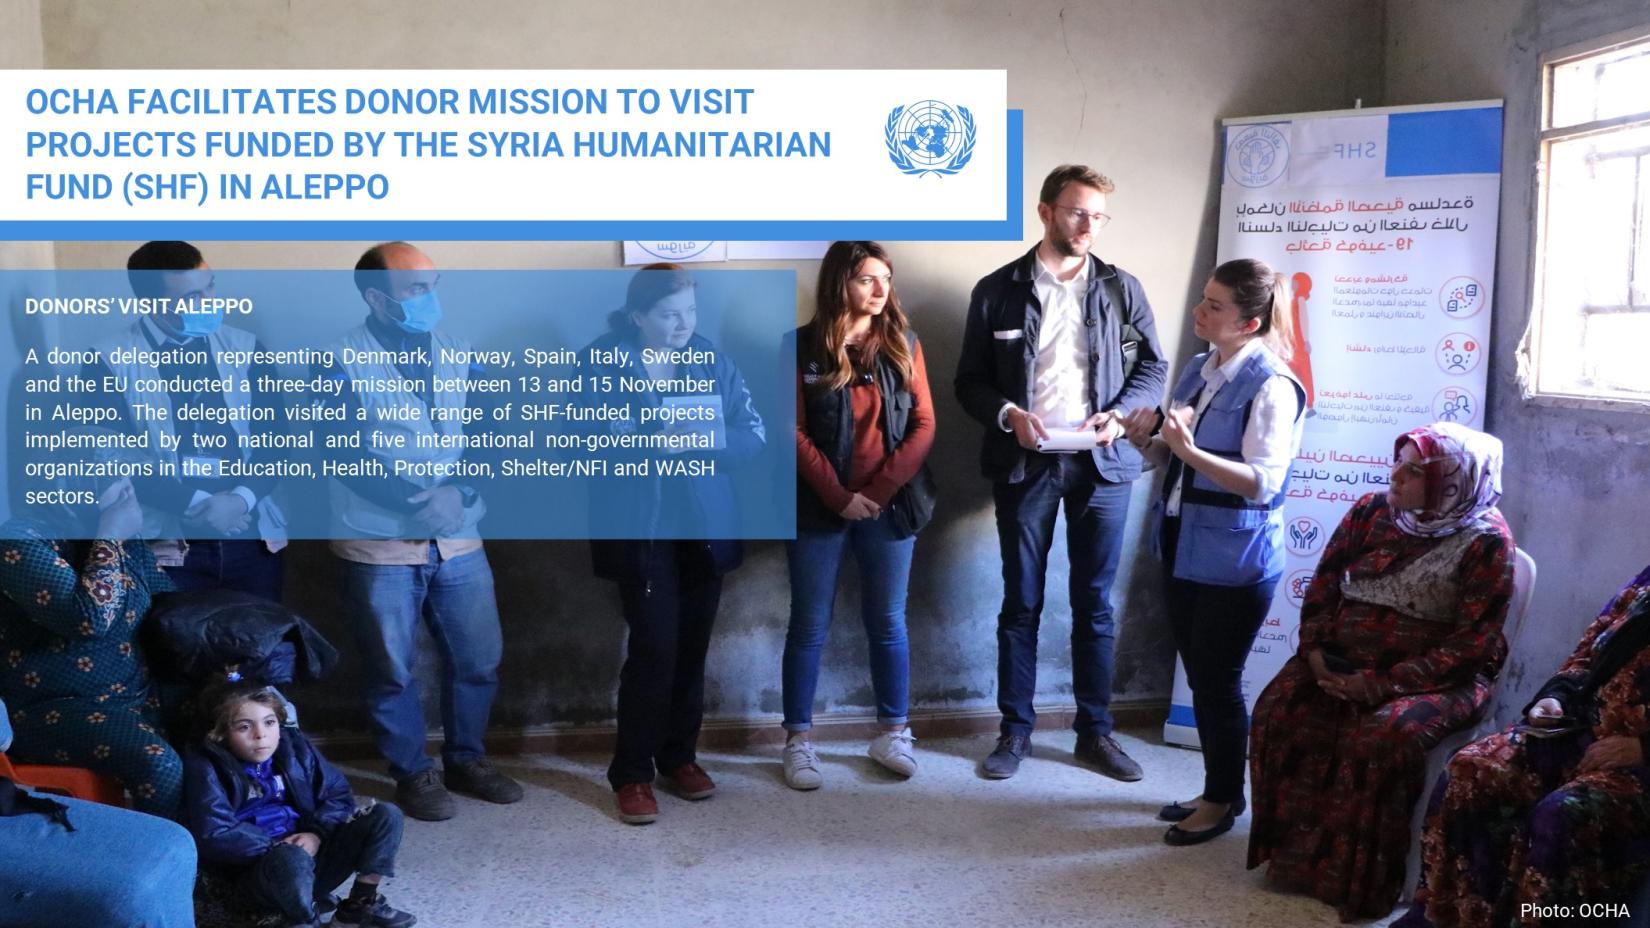 OCHA FACILITATES DONOR MISSION TO VISIT PROJECTS FUNDED BY THE SYRIA HUMANITARIAN FUND (SHF) IN ALEPPO